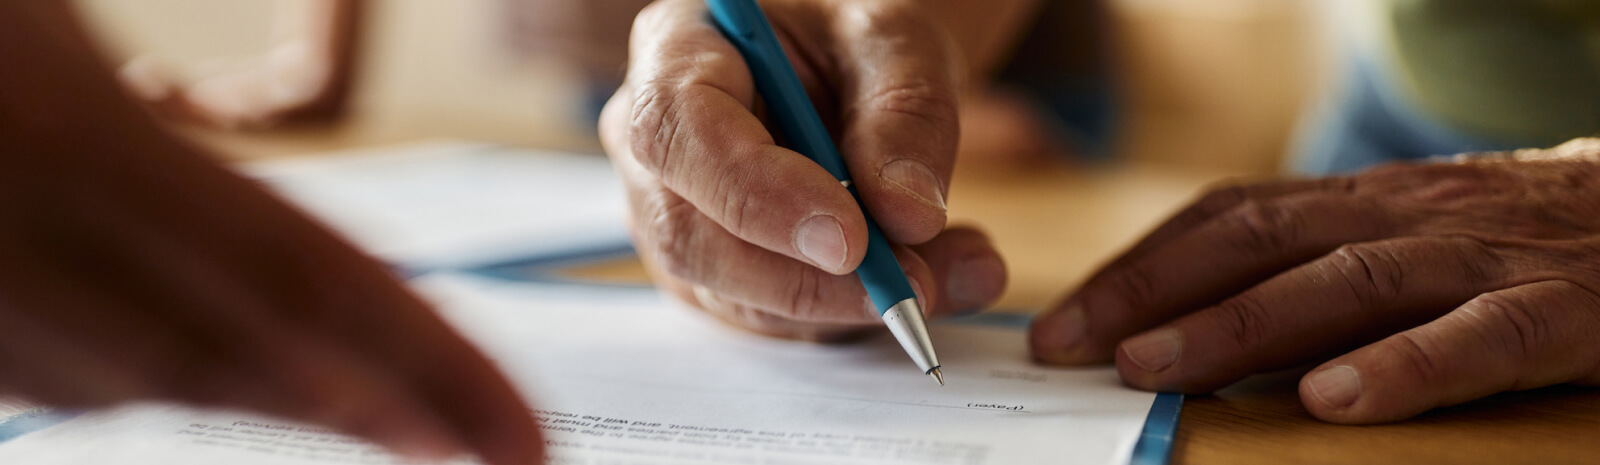 closeup of person signing a form